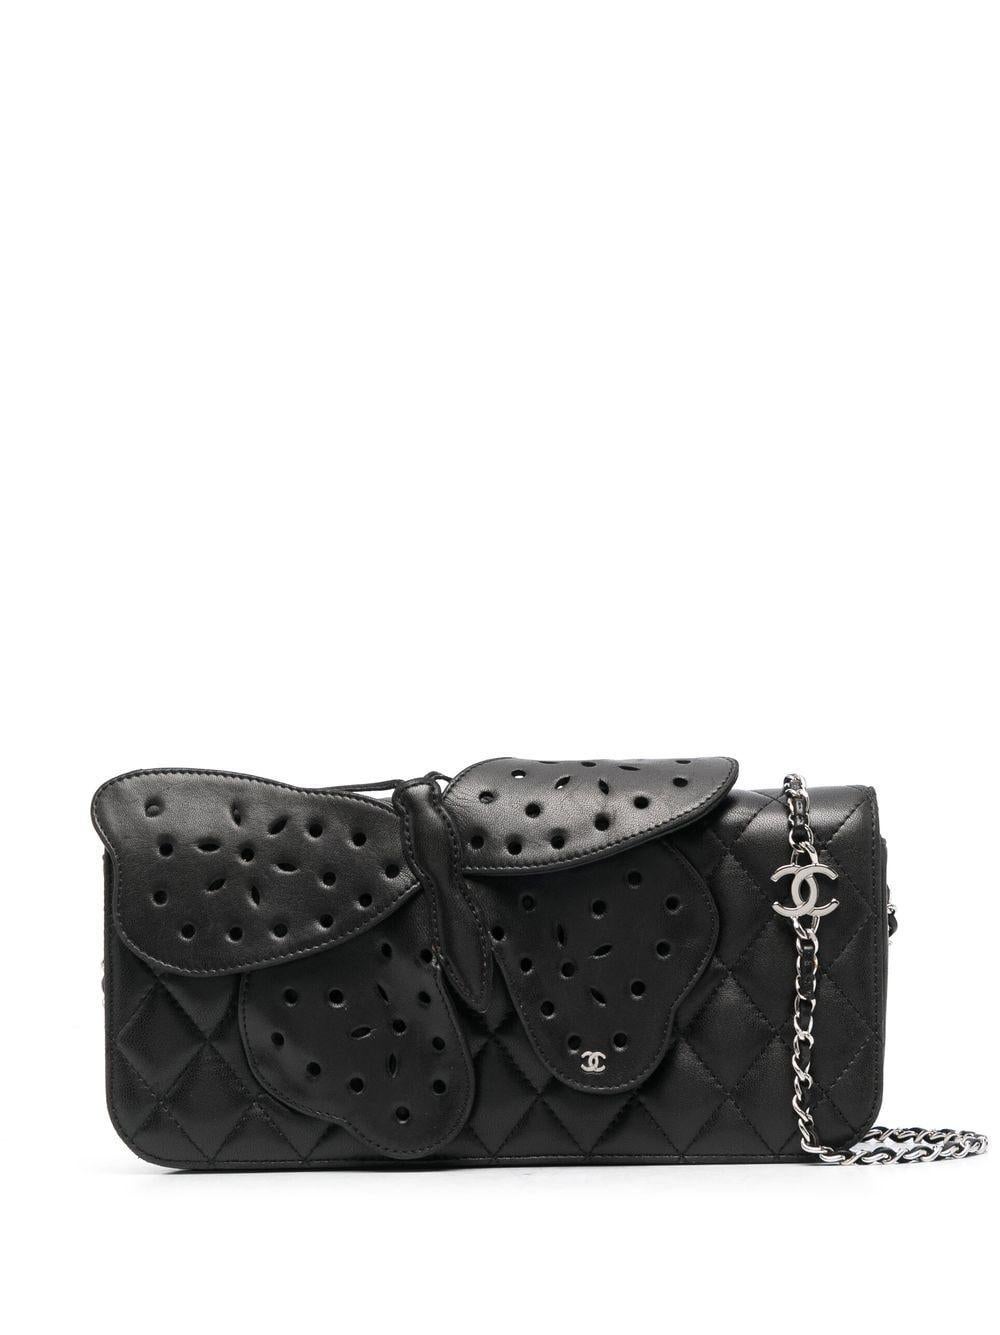 Chanel 2011 Rare Soft Lambskin Black Hand Slide Butterfly Ornament Clutch Flap In Good Condition For Sale In Miami, FL